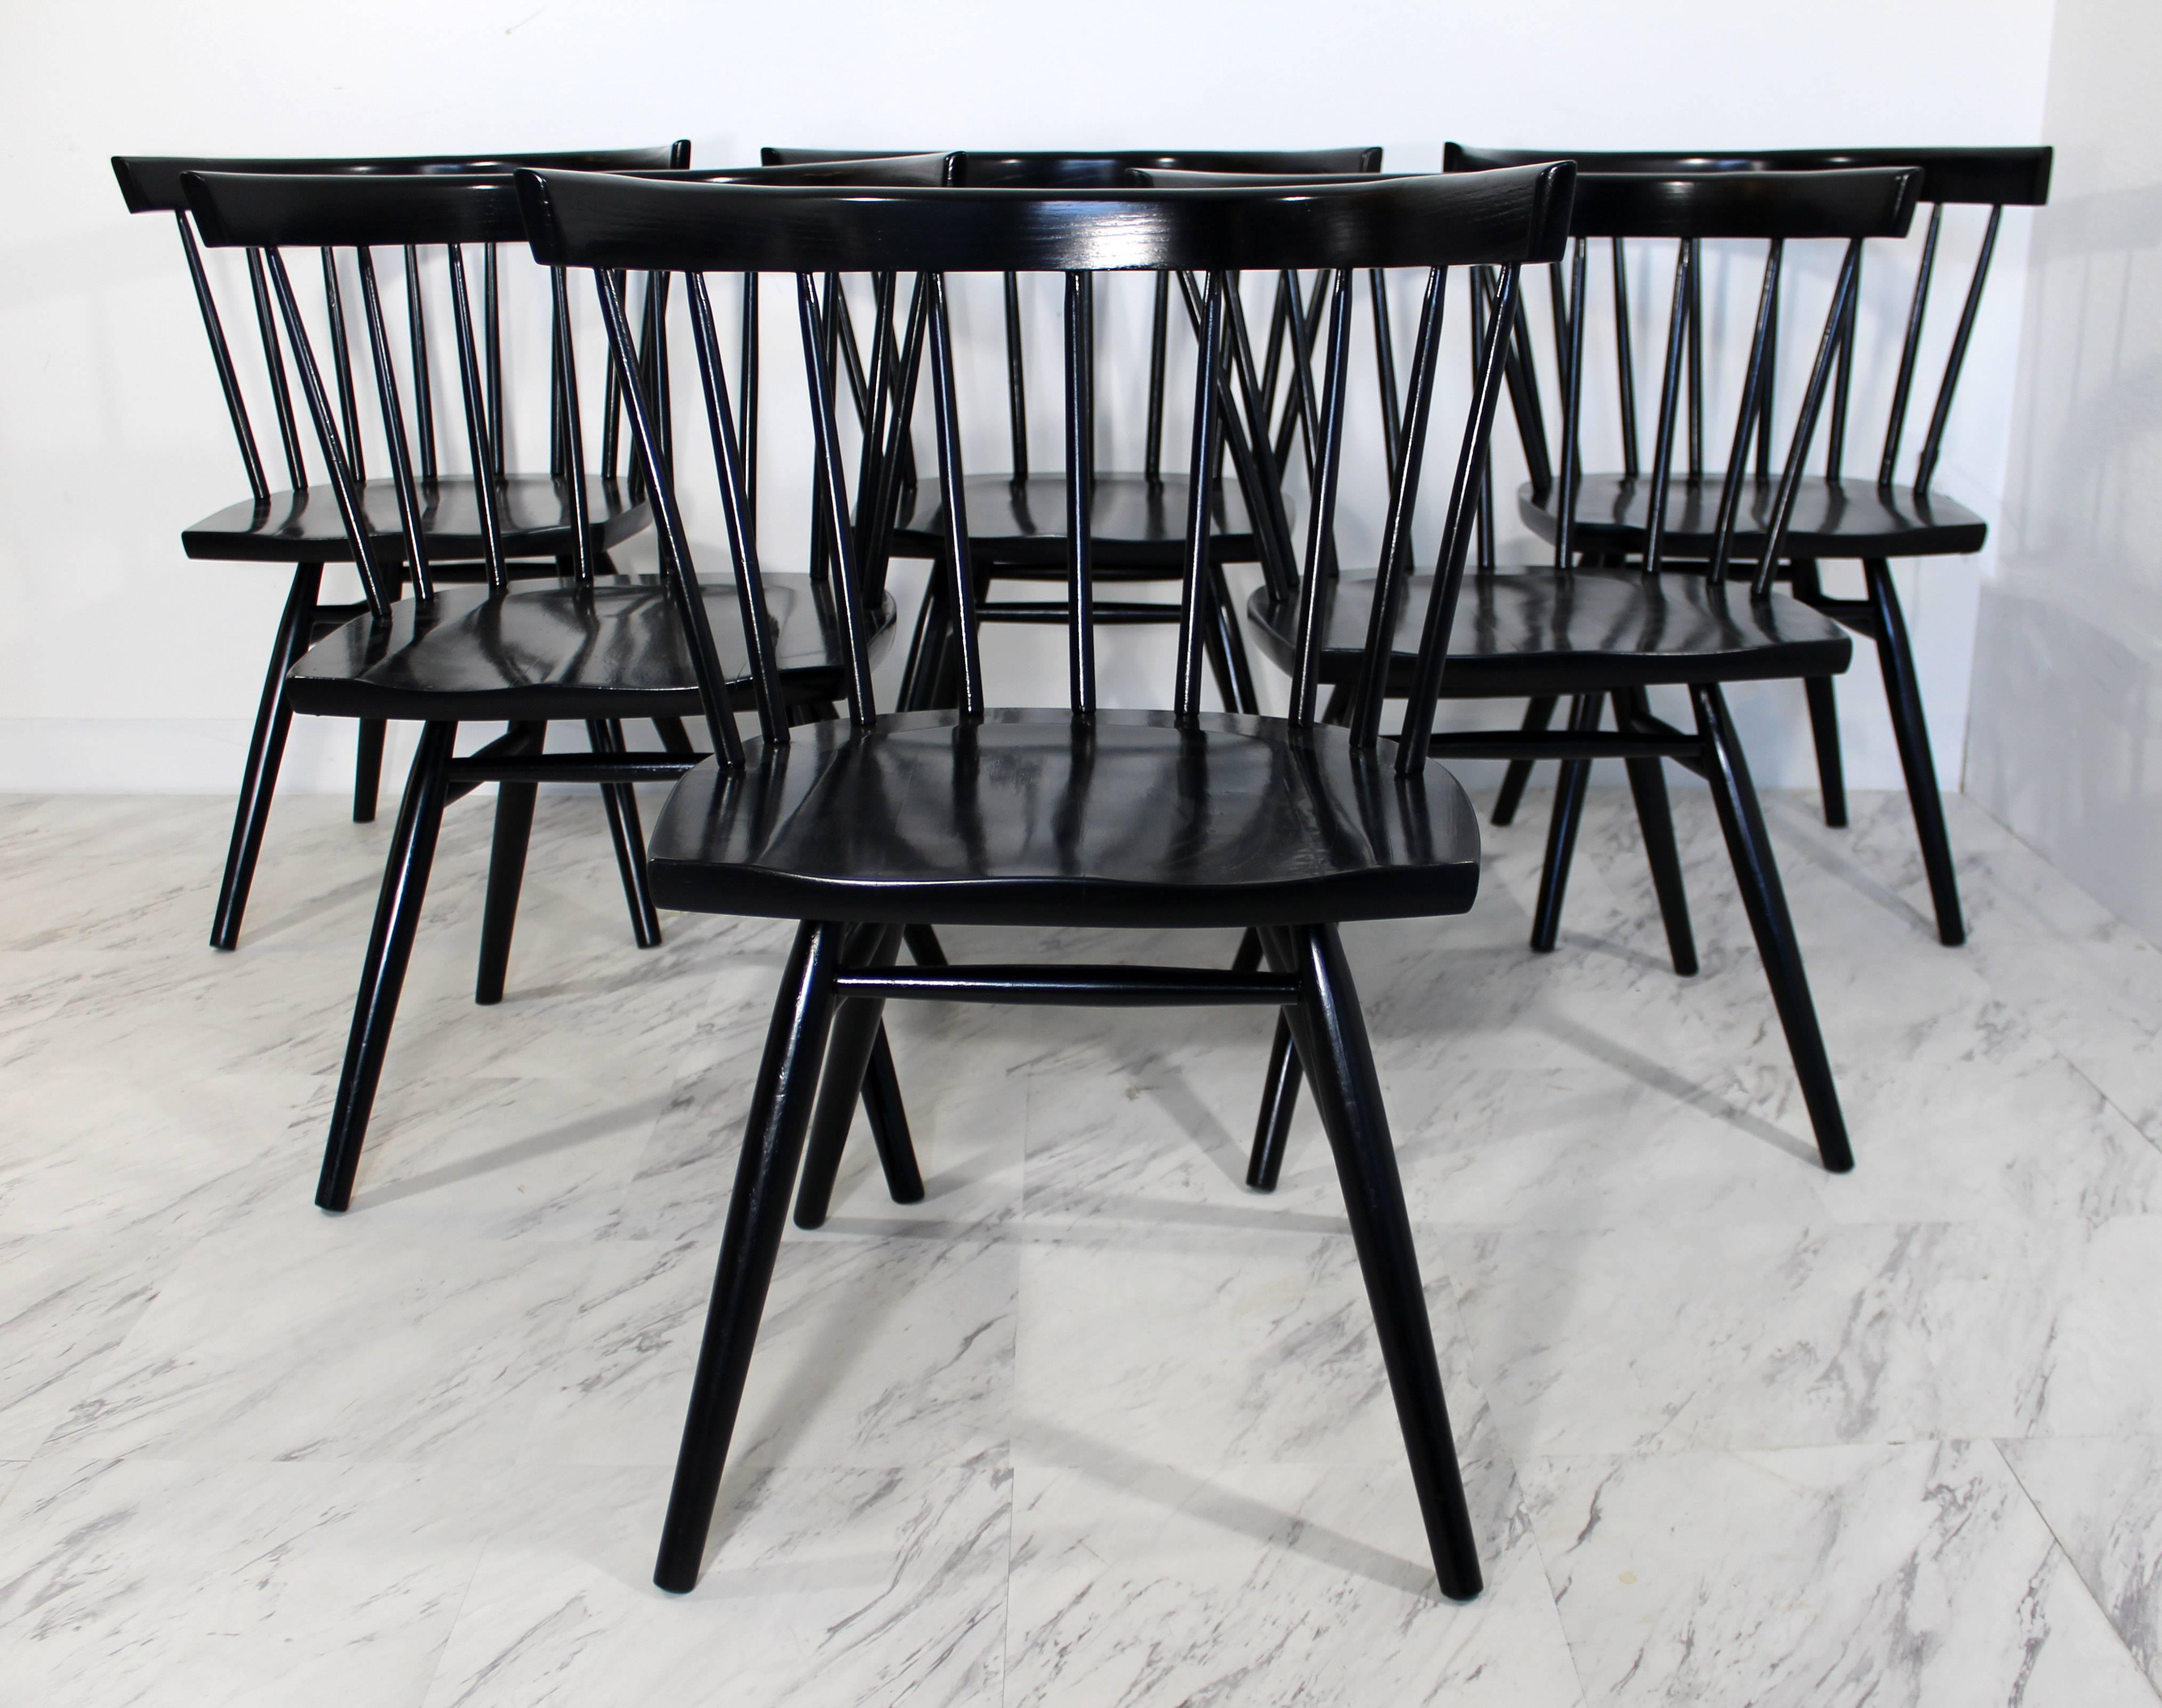 Stunning set of six dining chairs by George Nakashima for Knoll, Model N19 called the straight chair. These have been professionally redone in a beautiful semi gloss black, while still being able to see the wood grain pattern. In excellent